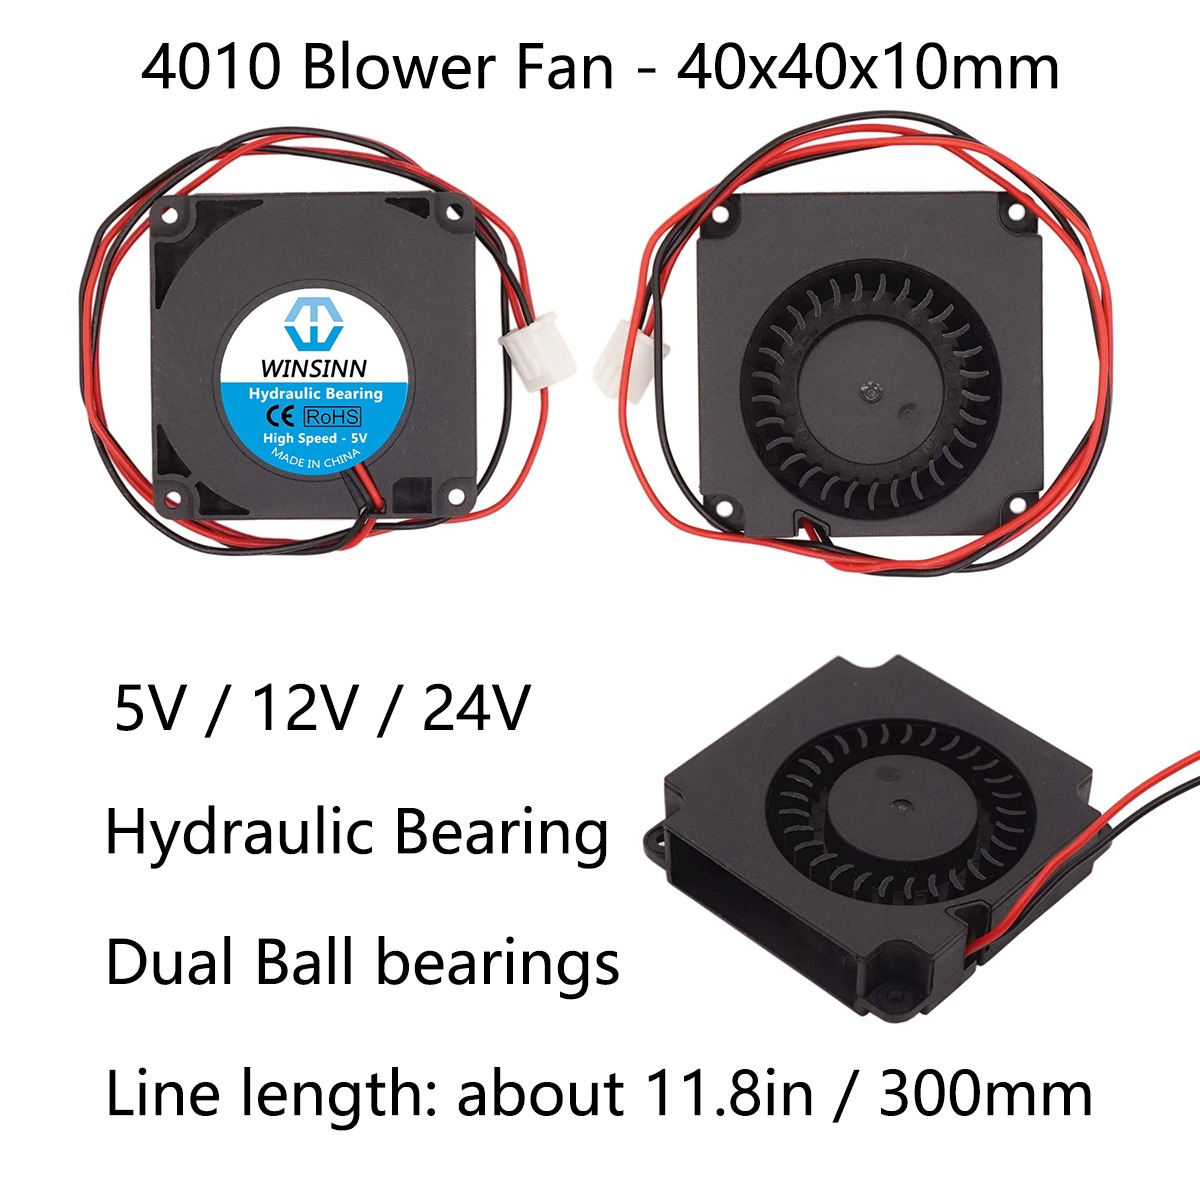 Pack of 5Pcs 2Pin 0.06A 1.44W 7000+-5% RPM WINSINN Blower Fan 24V 40mm Turbine Turbo Fan 40x10mm 4010 DC Brushless Dual Ball Bearing Cooling with Air Guide Parts for Ender 3 3D Printer 